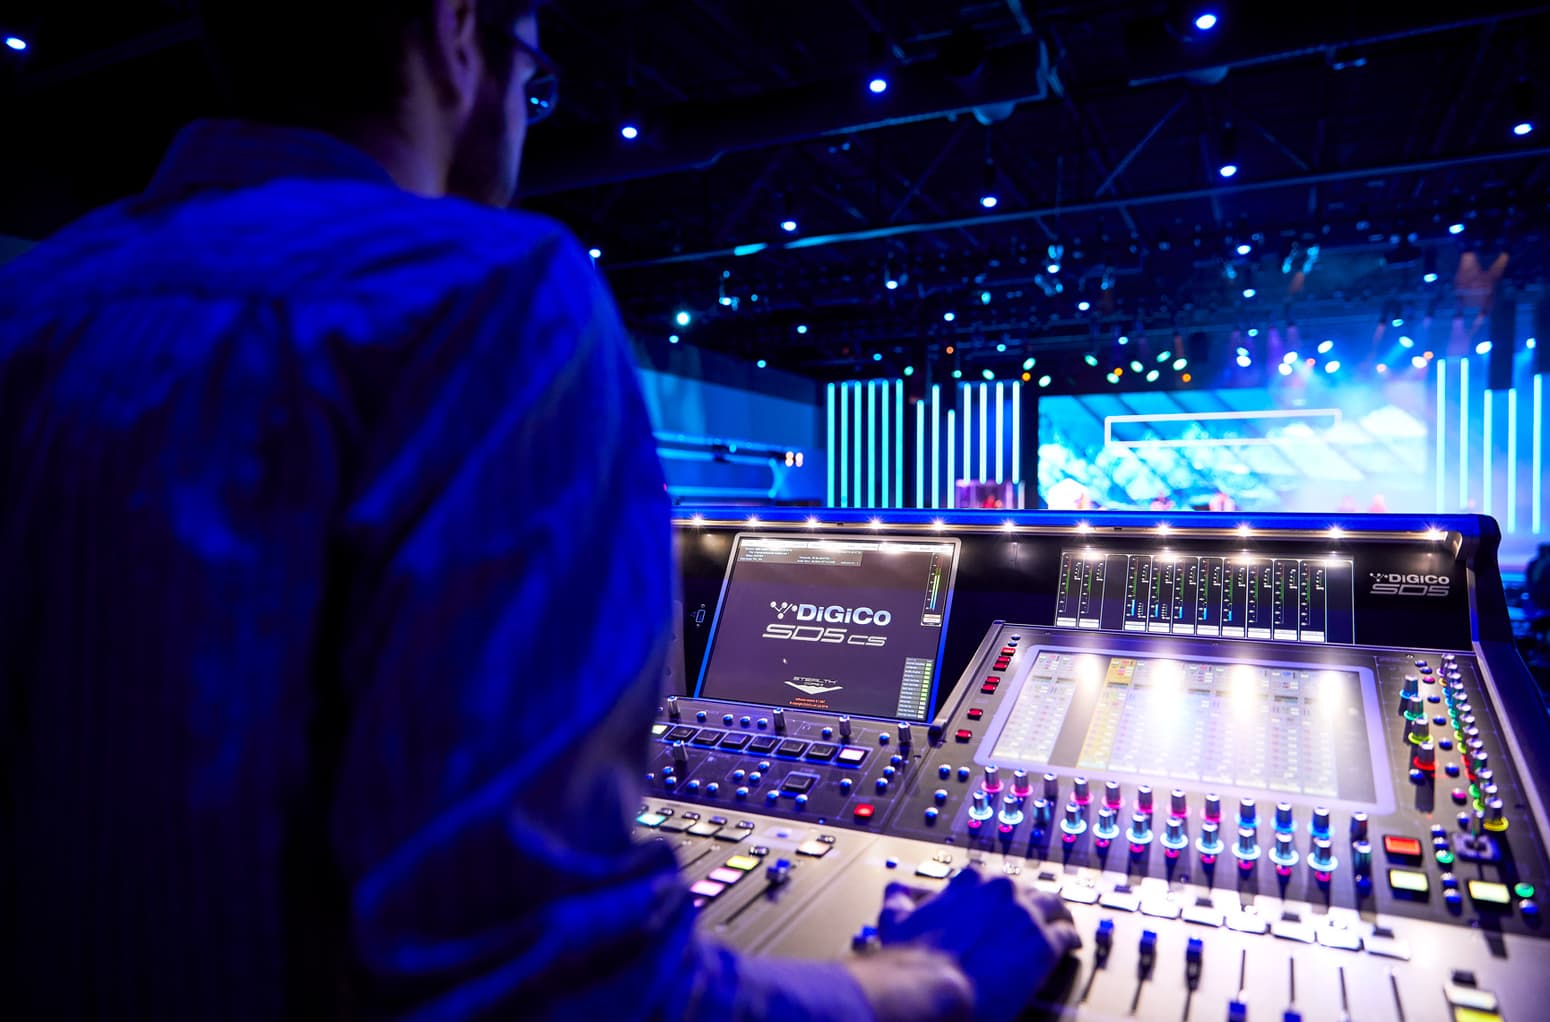 The church stage lighting controls seen here were a major improvement for Prestonwood Baptist.